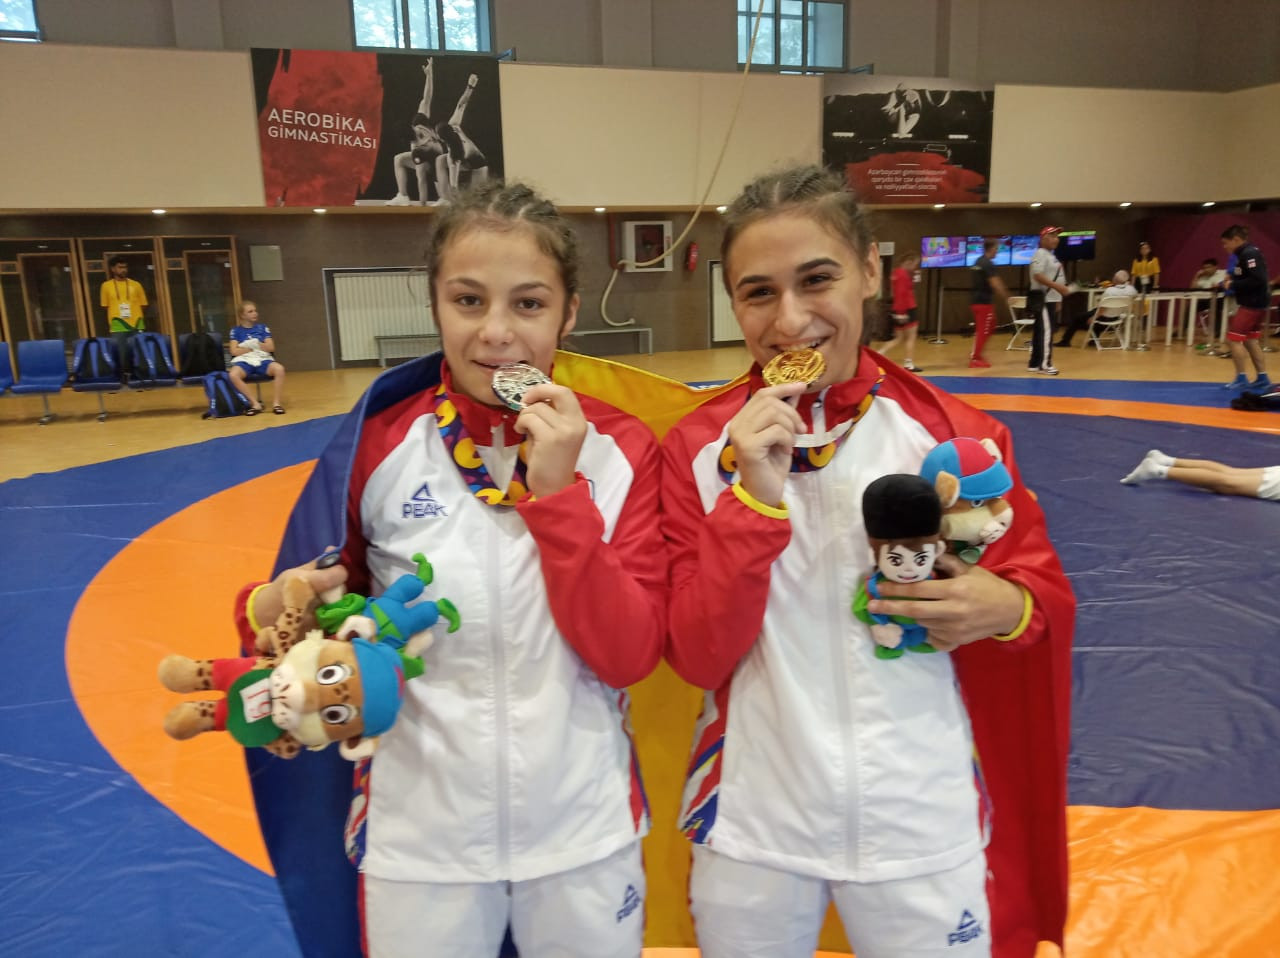 Romania claimed their first medals today ©Florin Miscu/Twitter